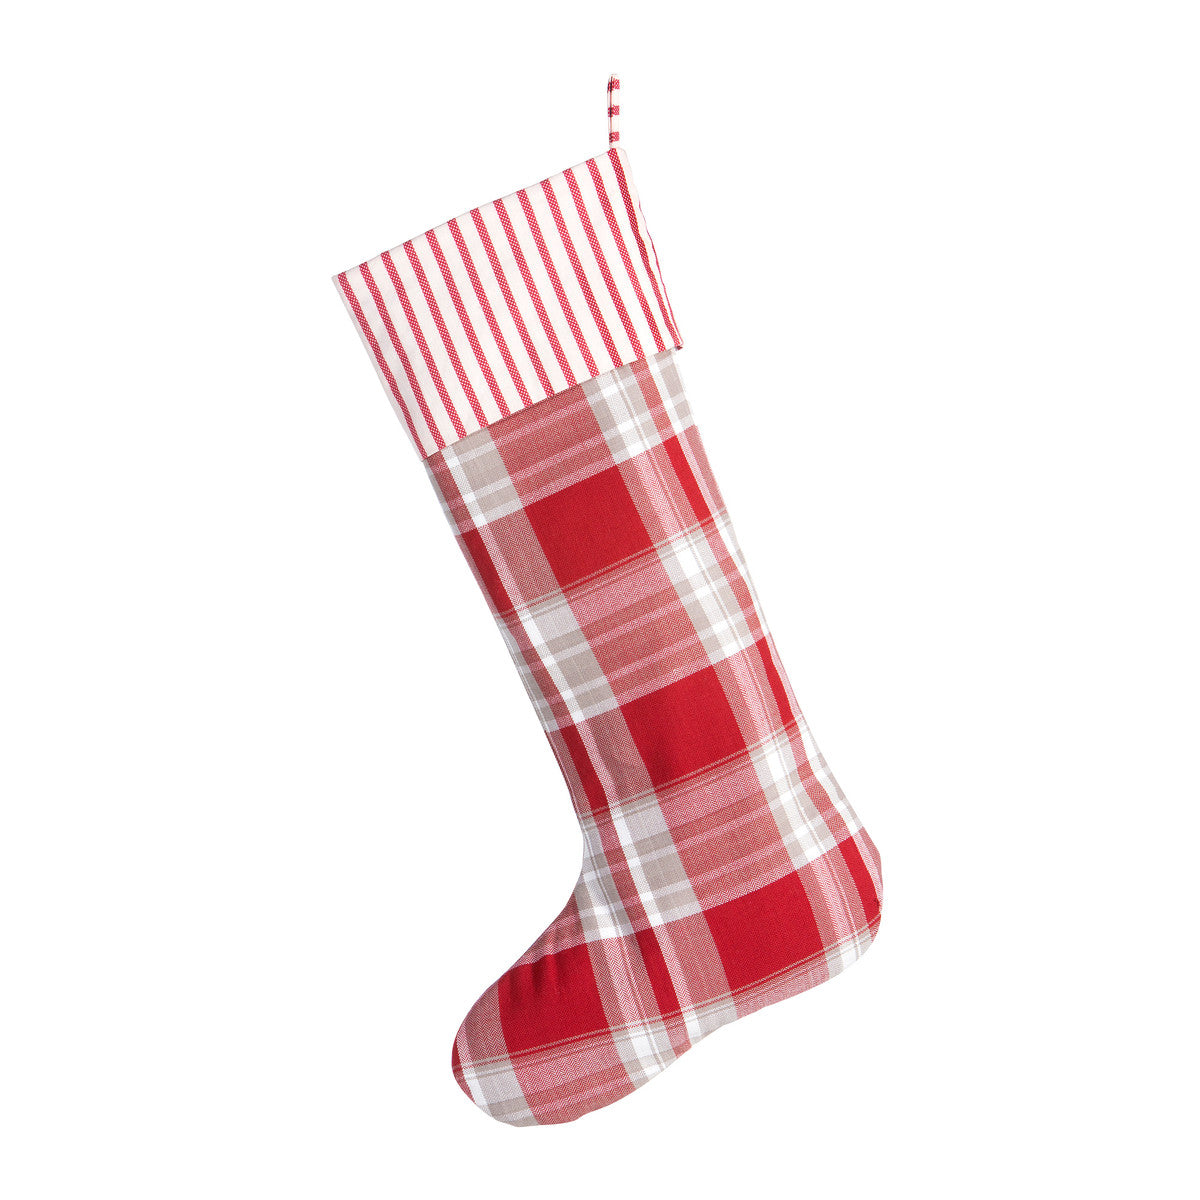 Red stockings pack of 2